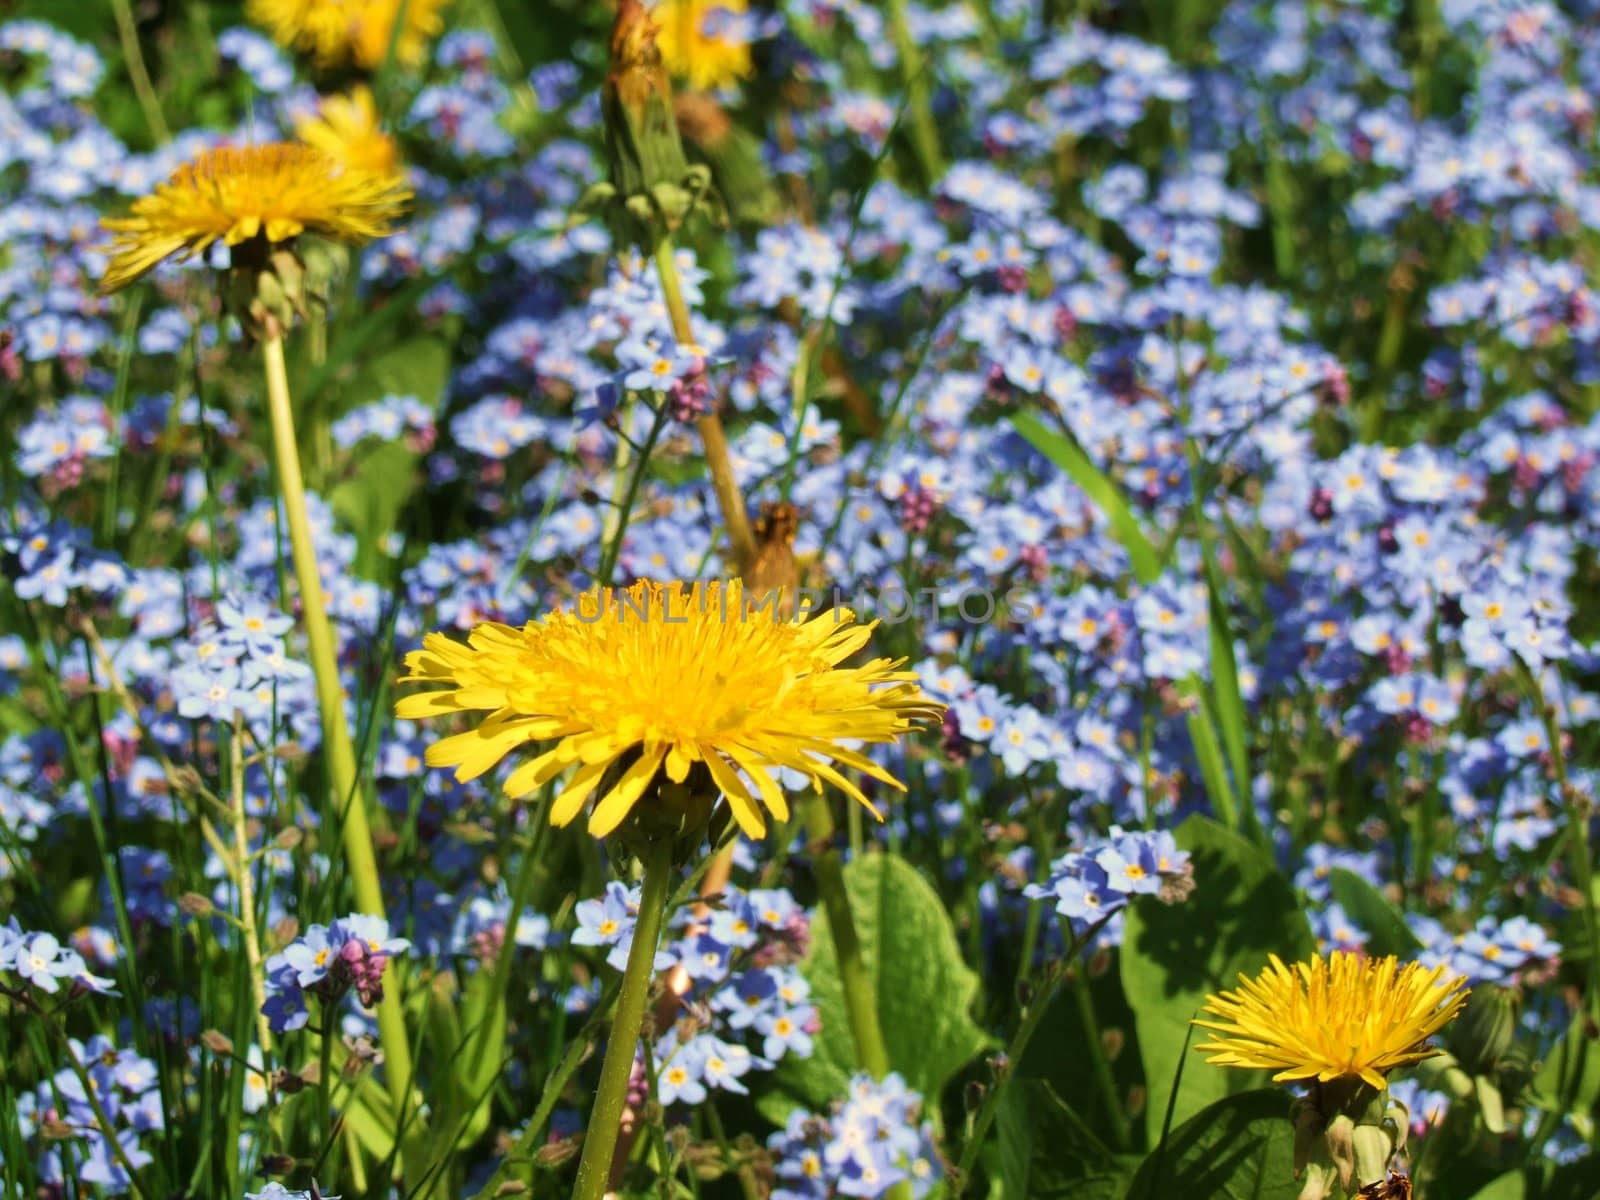 Yellow Dandelions and Small Blue Flowers